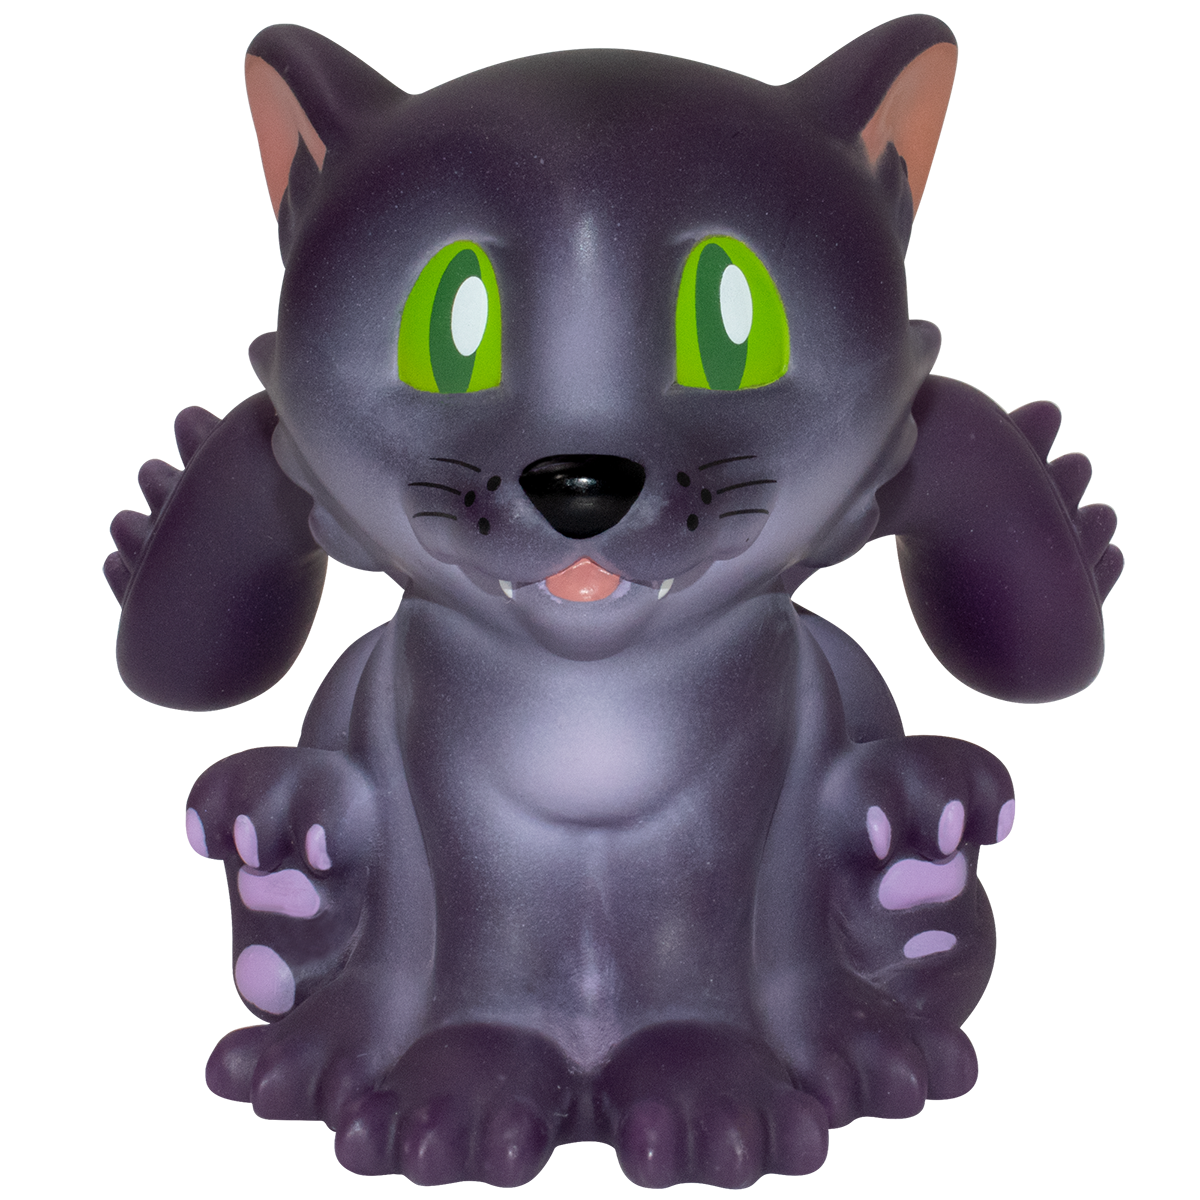 Figurines of Adorable Power: Dungeons & Dragons "Displacer Beast" | Ultra PRO International